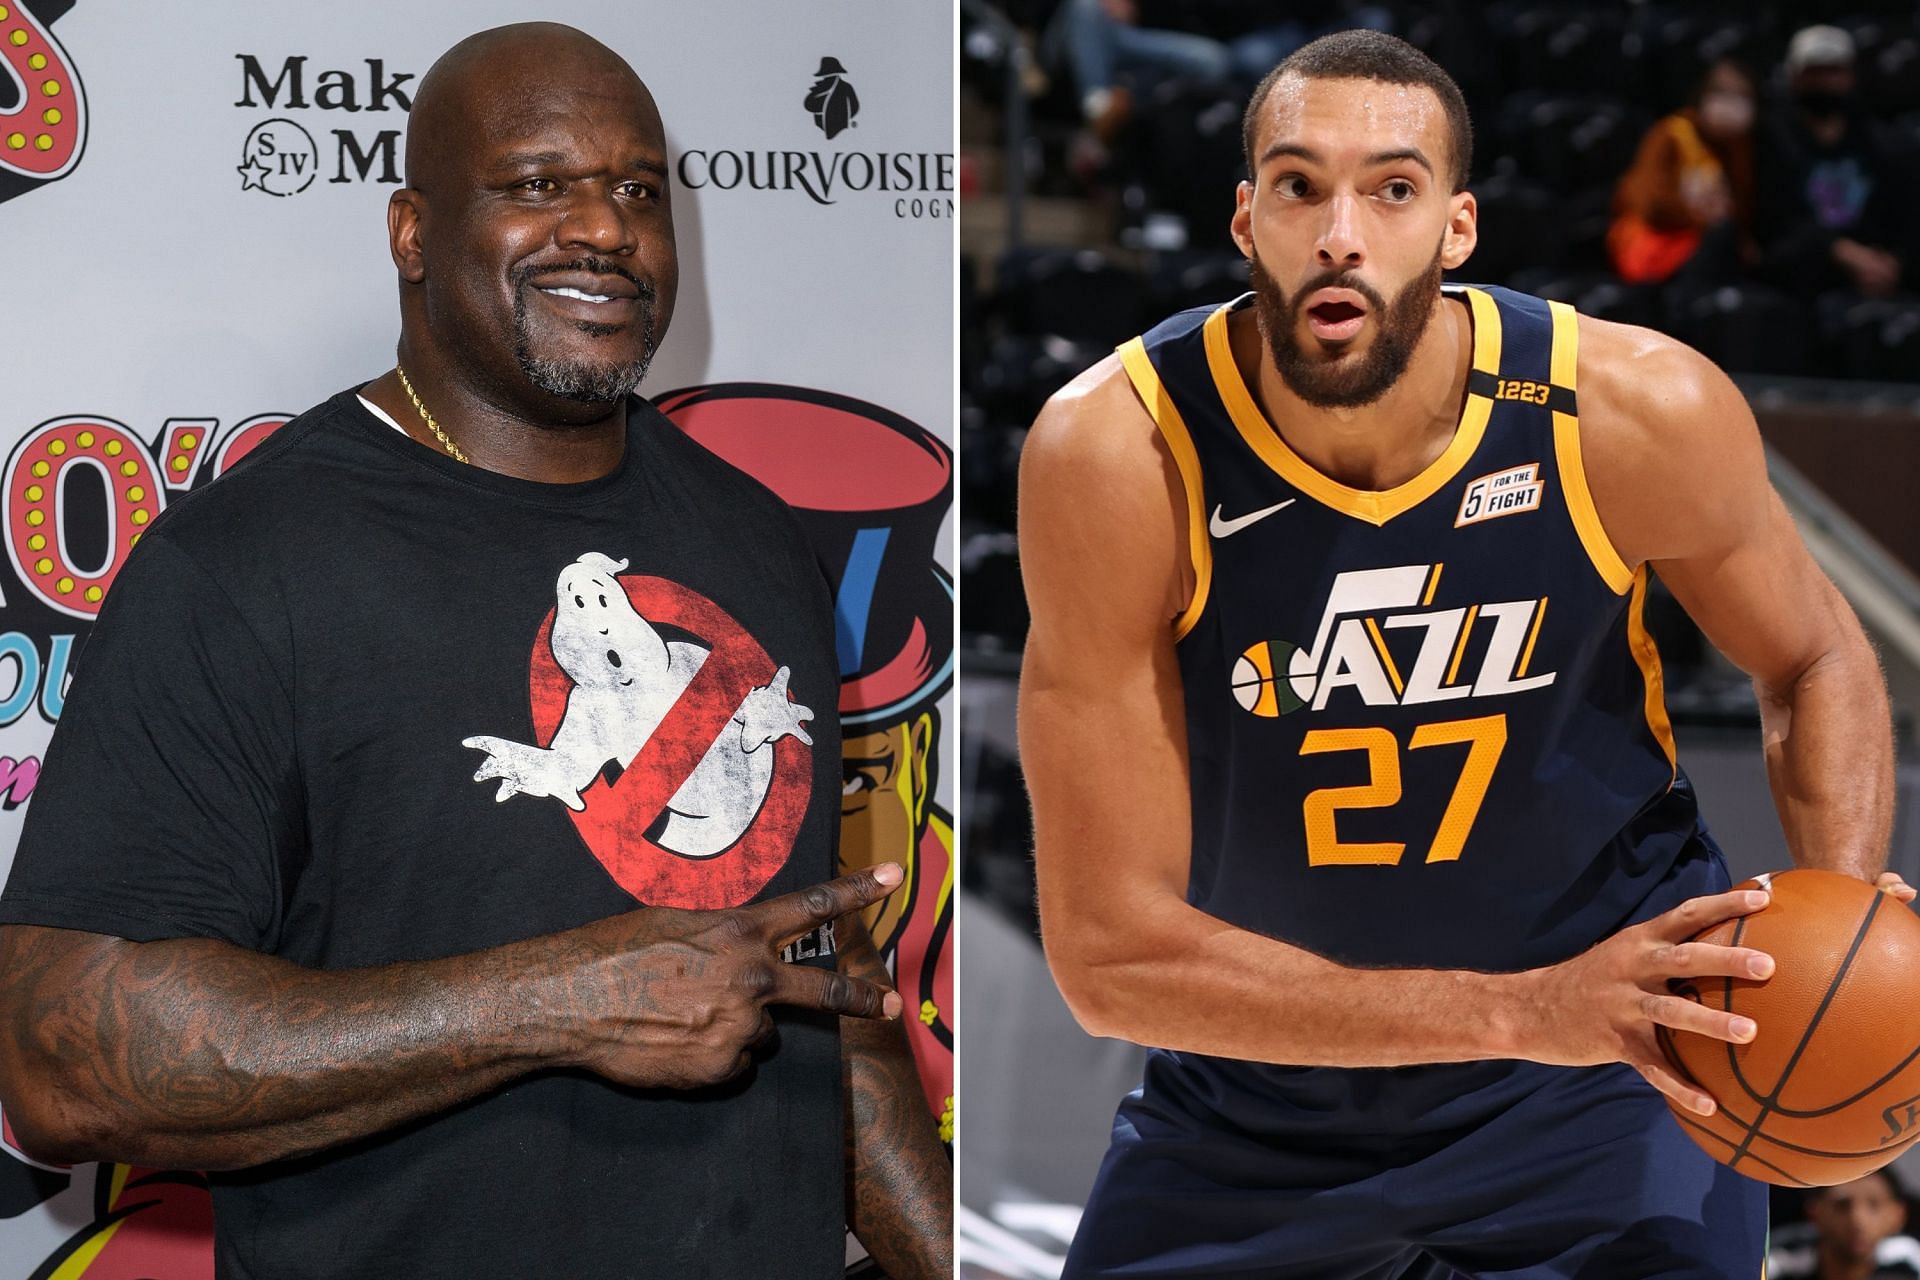 NBA legend Shaquille O&rsquo;Neal and former Utah Jazz star center Rudy Gobert